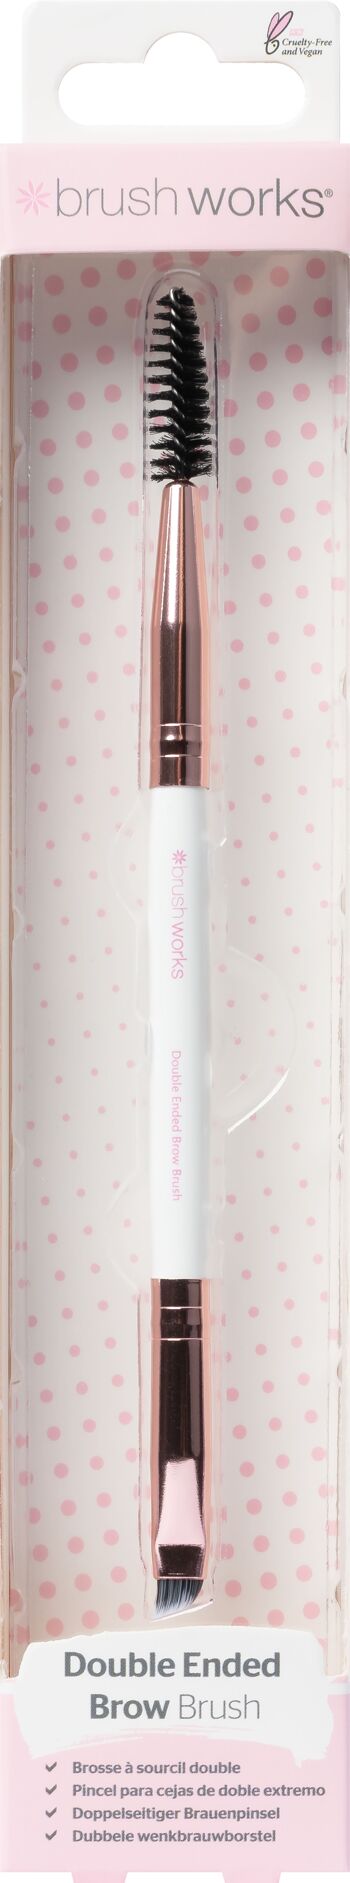 Brushworks Pinceau Duo Sourcils Blanc & Or 1